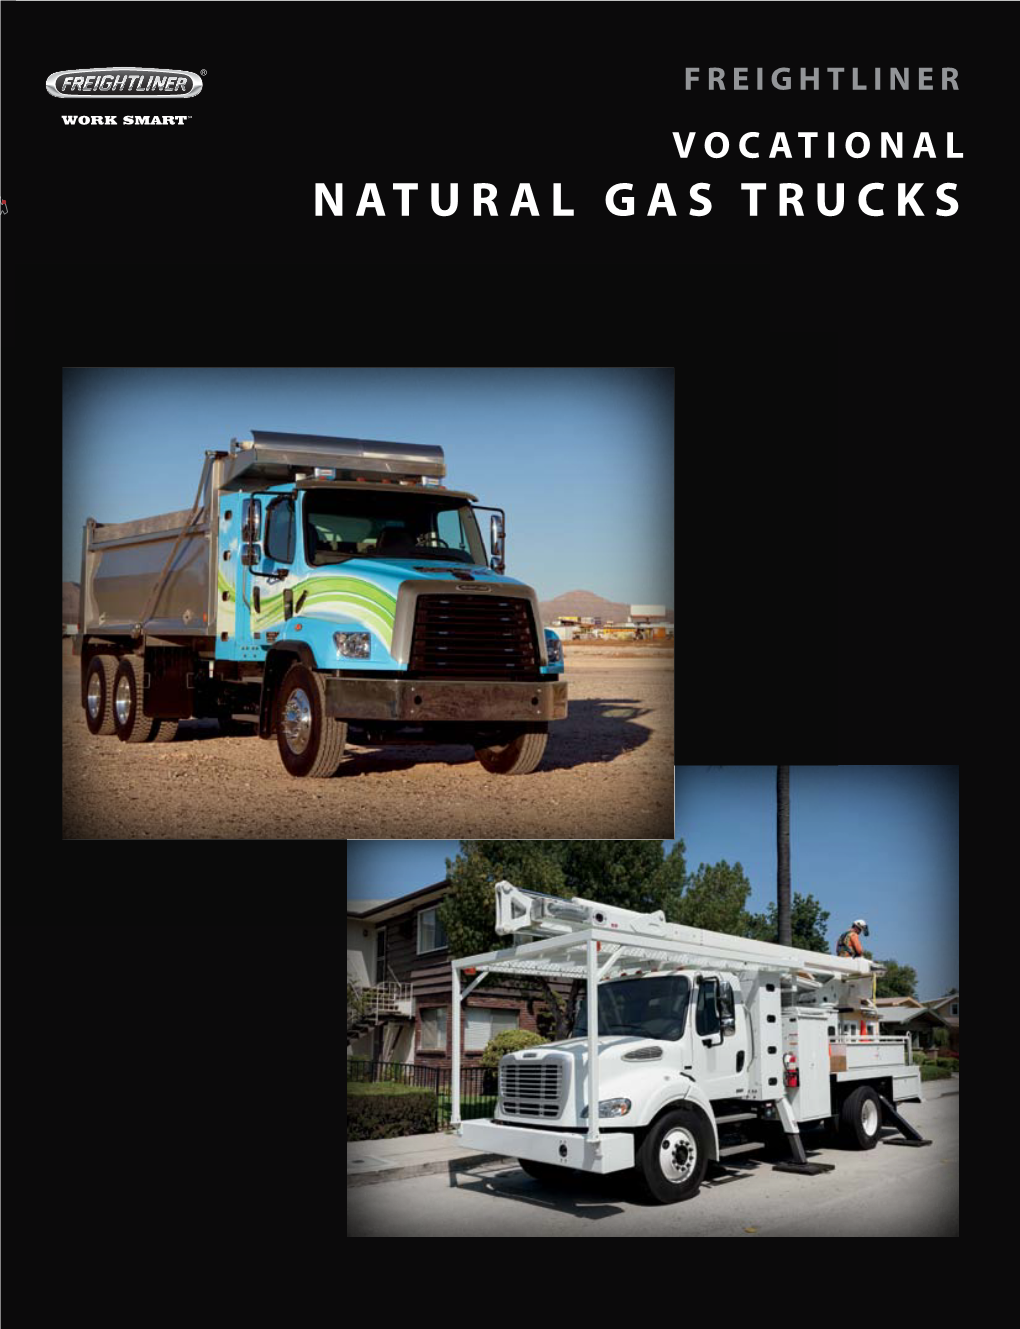 Natural Gas Trucks FUELING YOUR FUTURE